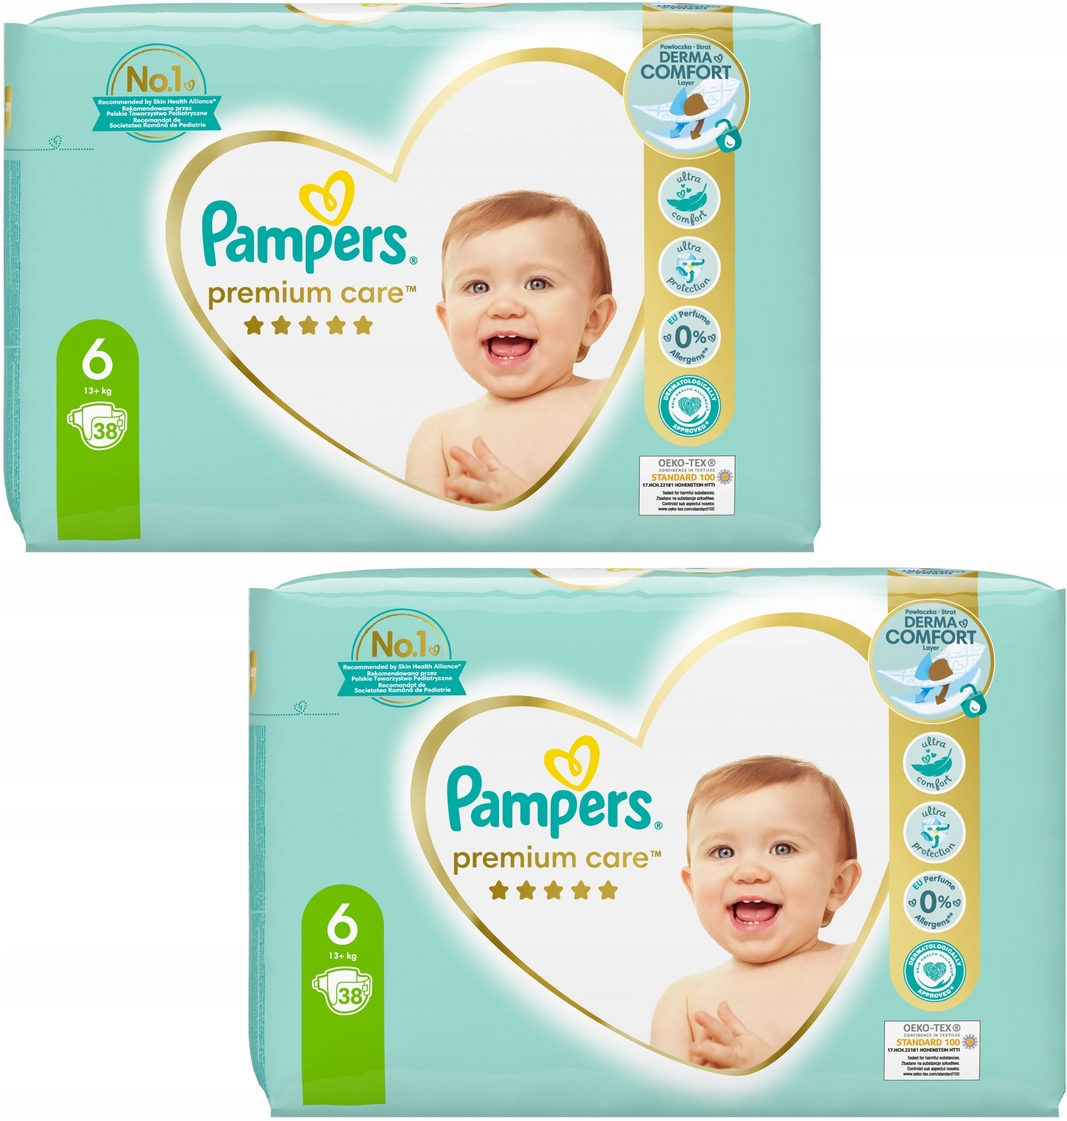 pampers 2 78szt